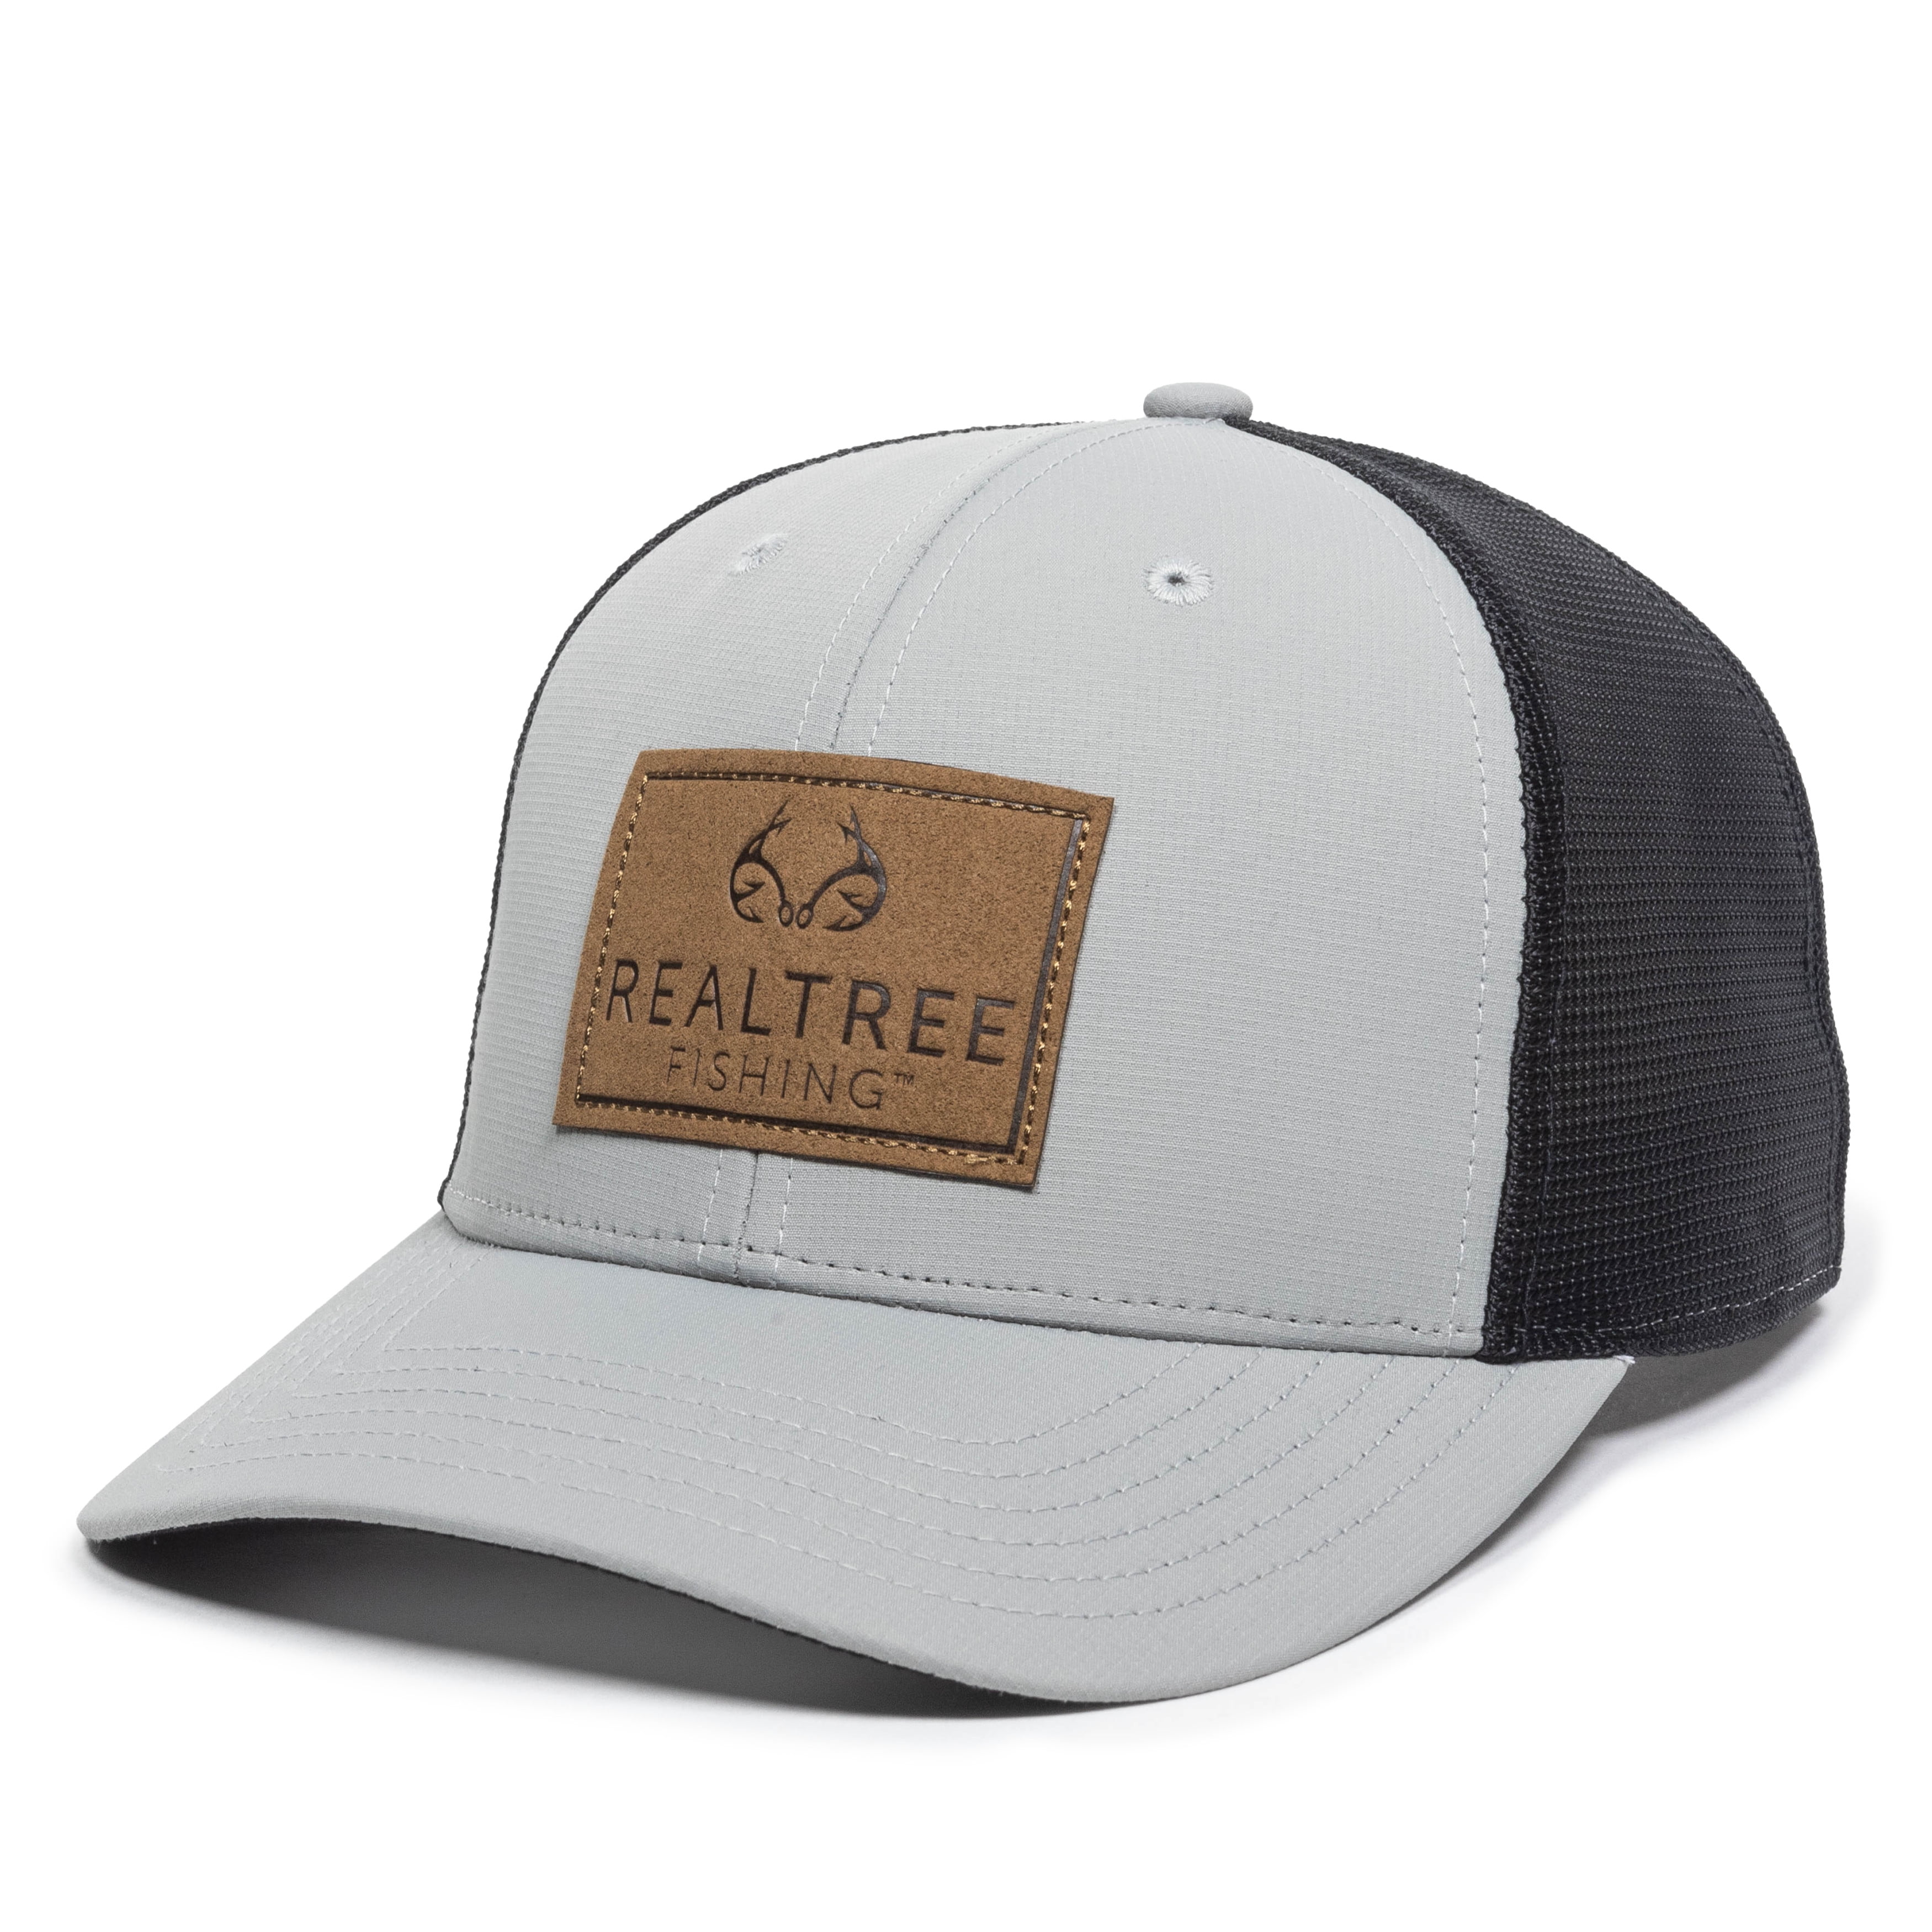 Realtree Fishing Structured Baseball Style Hat, Grey/Black, Adult